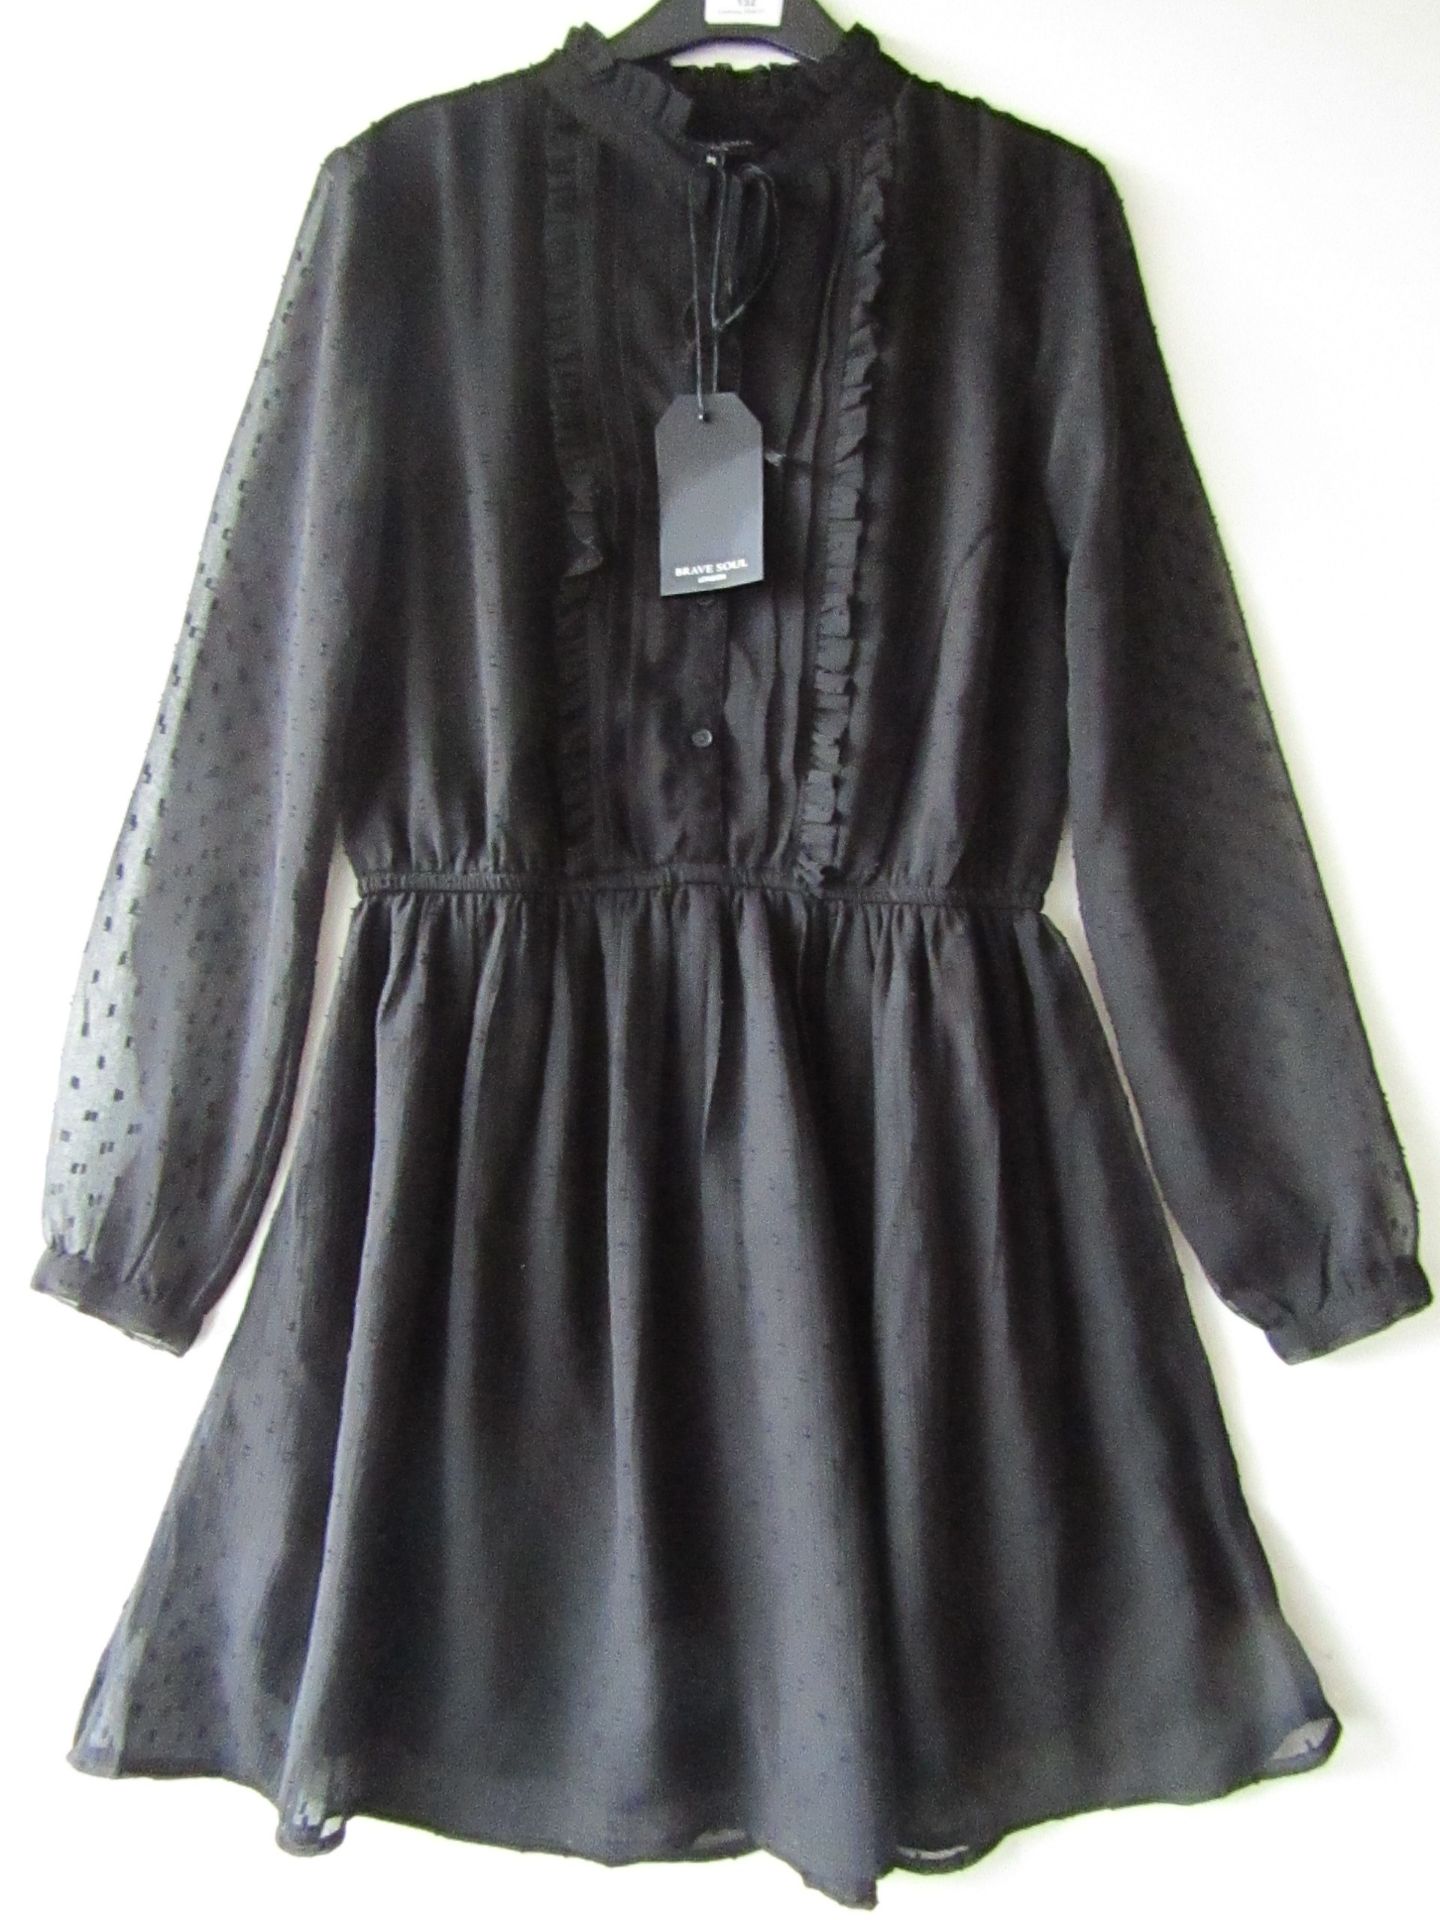 Ladies Brave Soul Long sleeved Dress with tag. New Sample. Size M